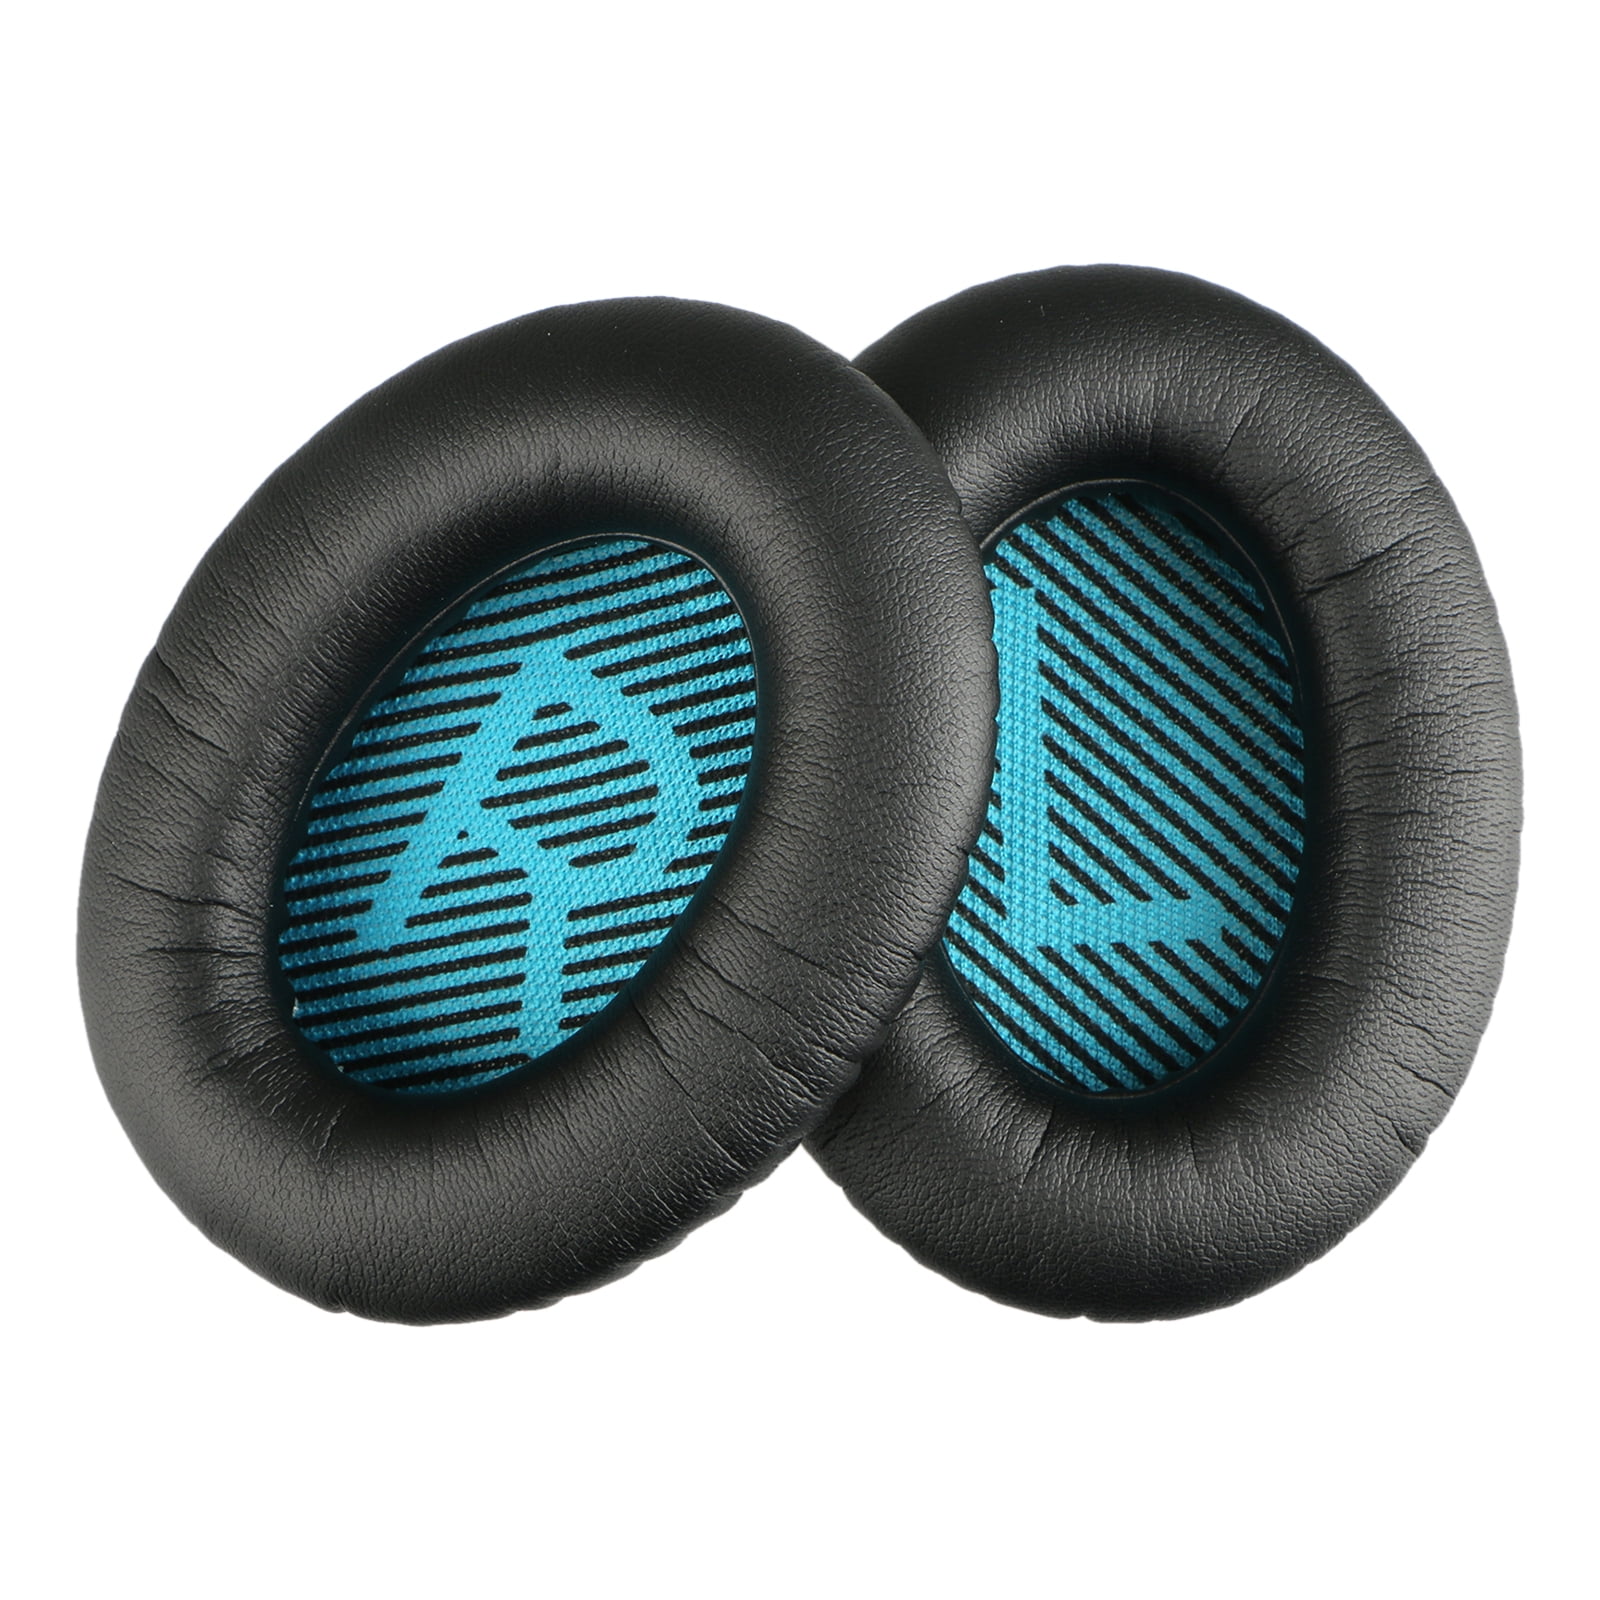 Made with Premium Faux Leather & Real Memory Foam Upgraded Earpads for Bose QC25 Replacement Ear Pads Soft & Long Lasting Earpads Also Fits QuietComfort 15 / QC15 / Ae2 & SoundLink by Brainwavz